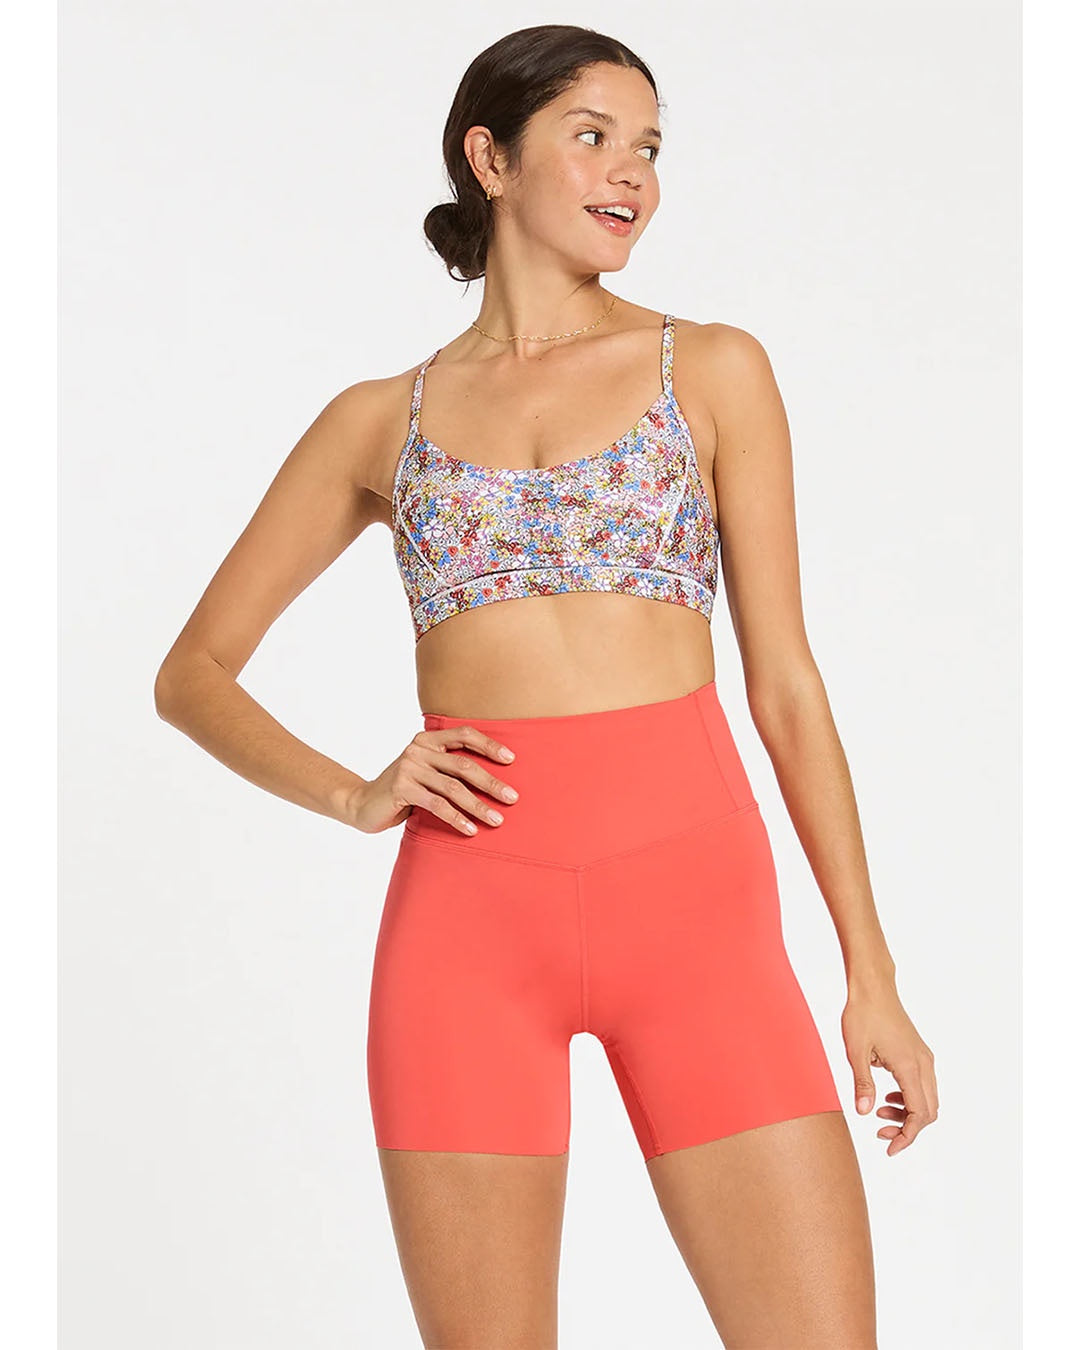 Barely There Bralette - Forget Me Not Floral Sports Bras & Crops by Nimble - Prae Store